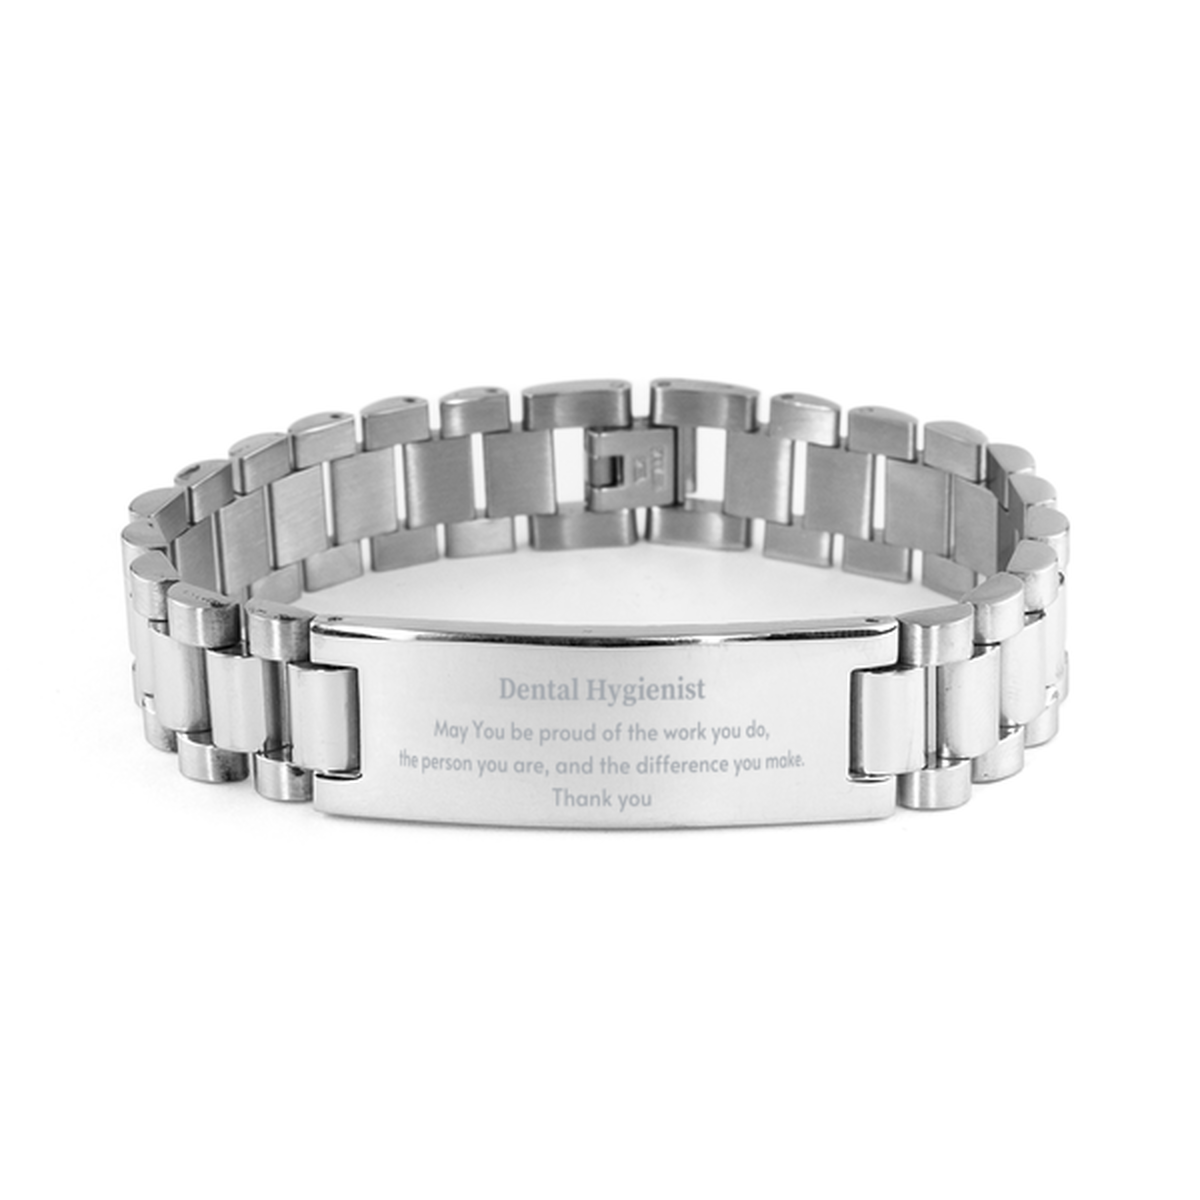 Heartwarming Ladder Stainless Steel Bracelet Retirement Coworkers Gifts for Dental Hygienist, Dental Hygienist May You be proud of the work you do, the person you are Gifts for Boss Men Women Friends